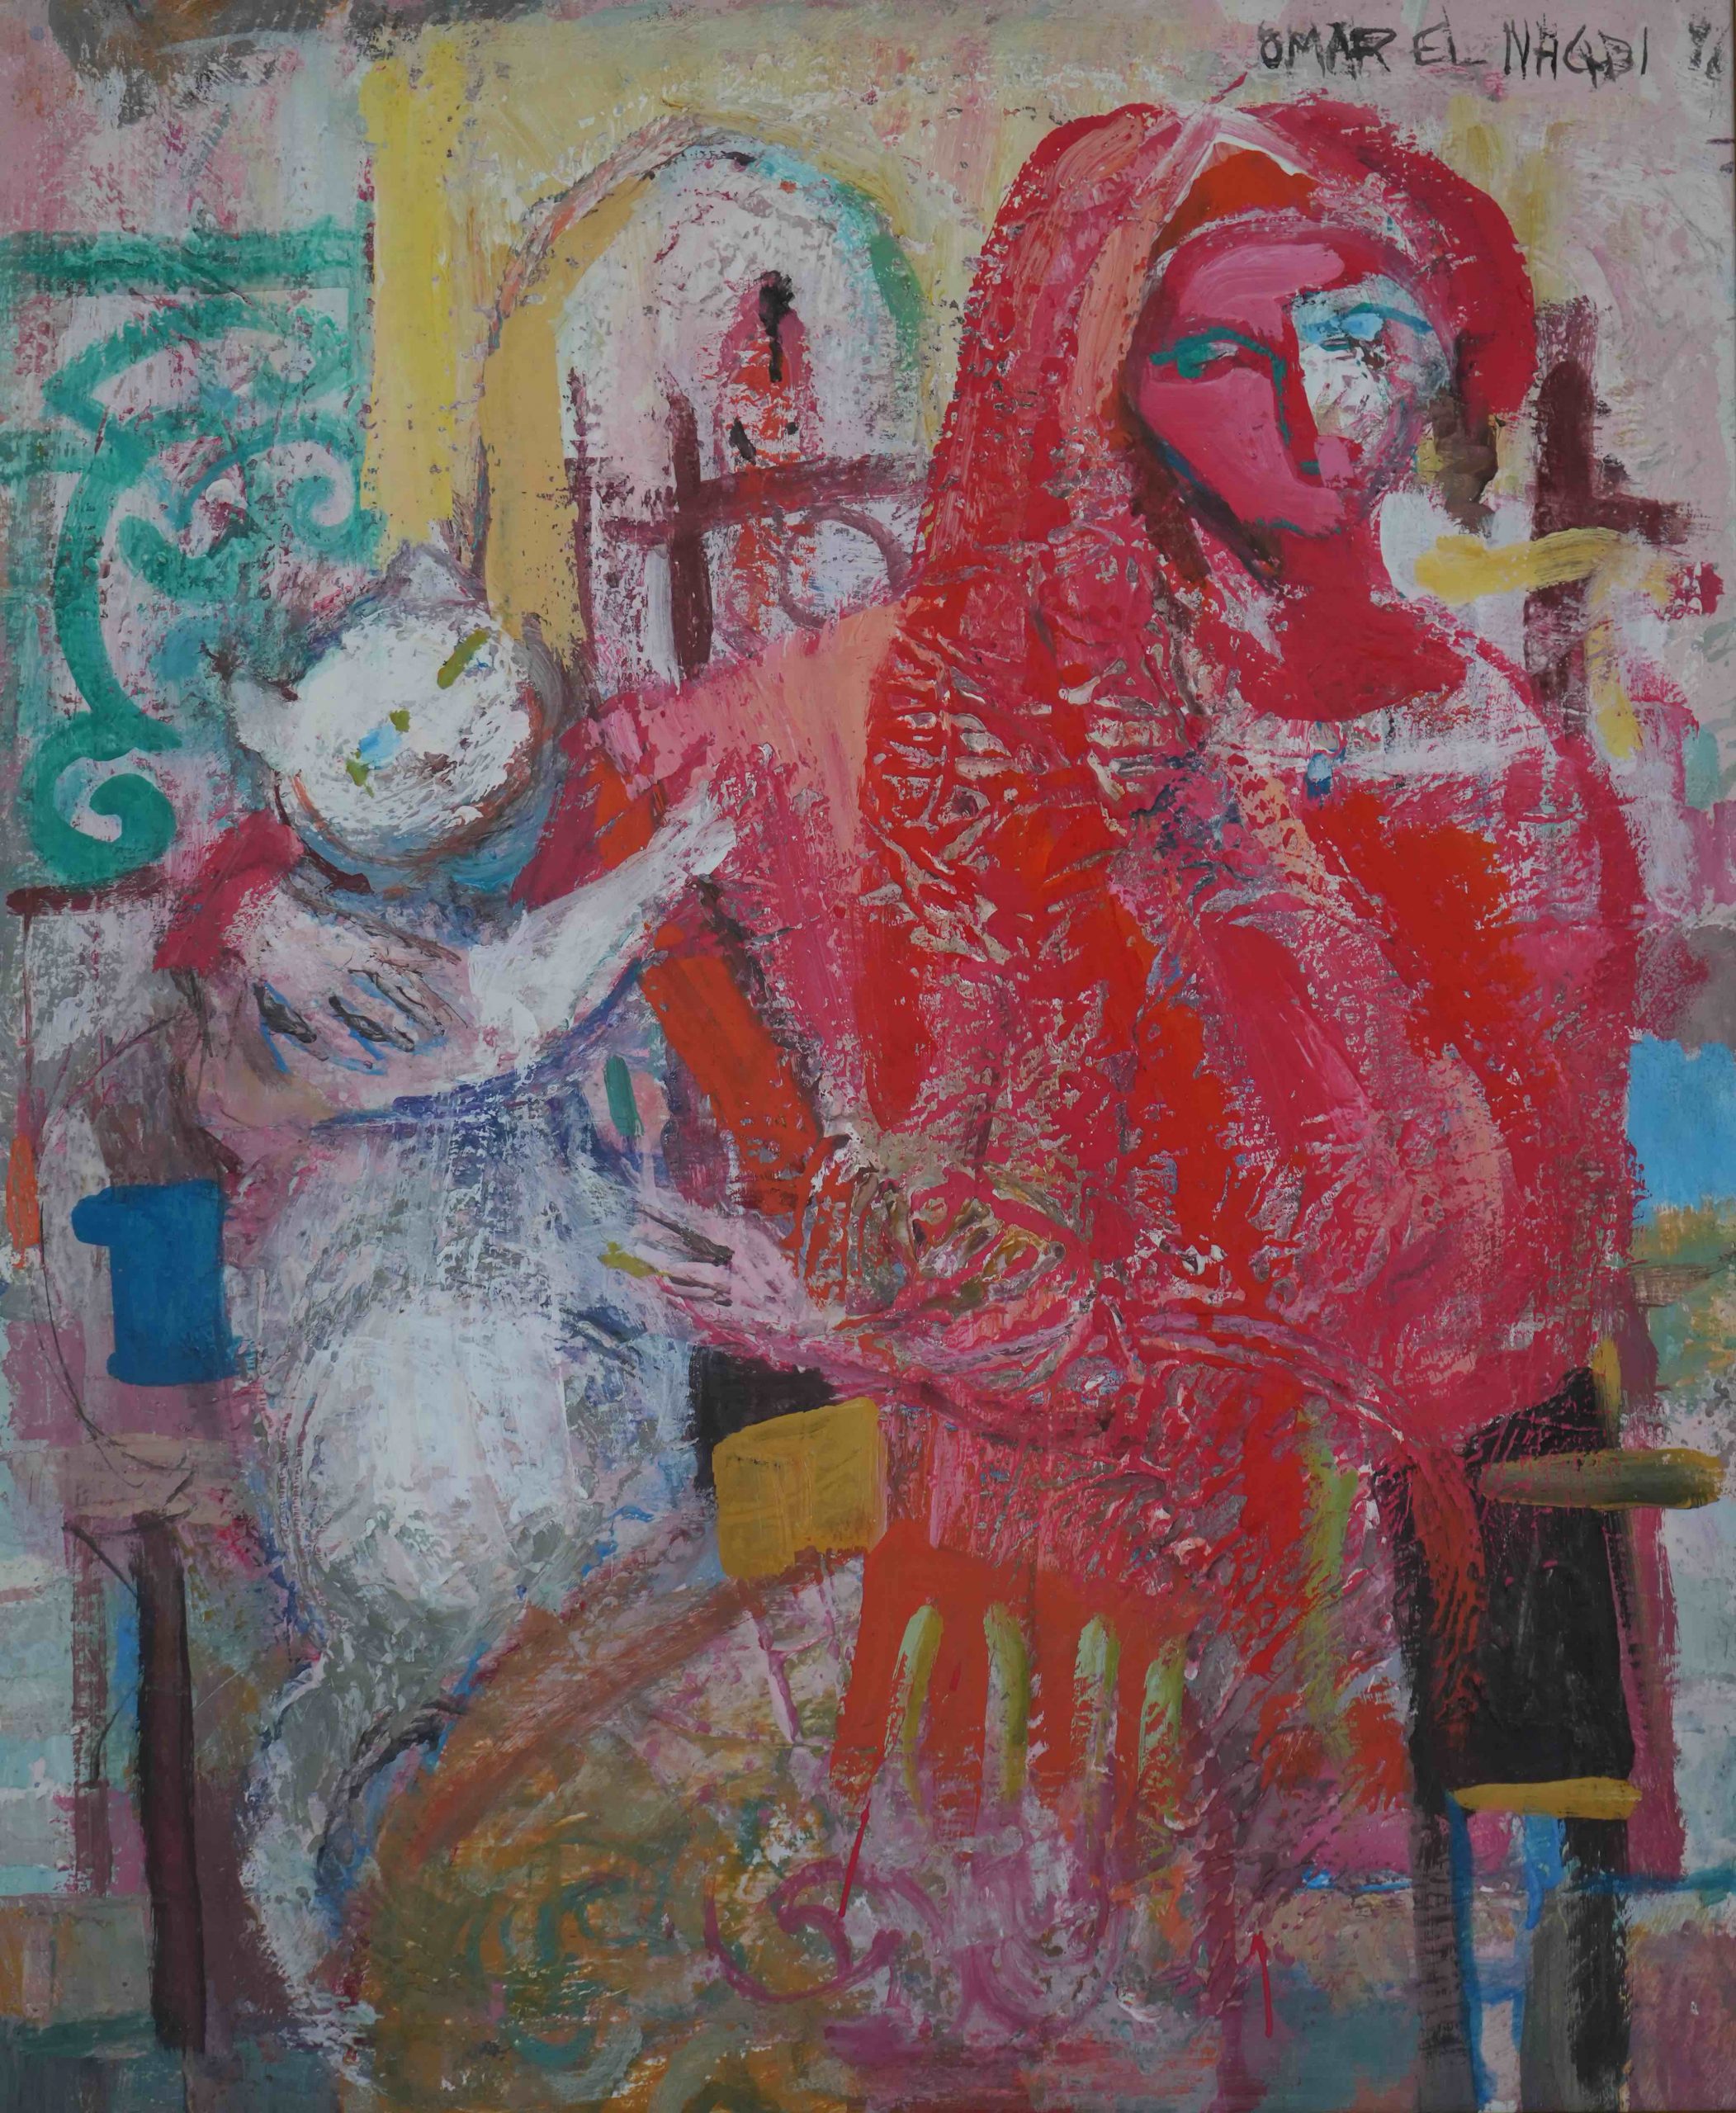 Omar El Nagdi Oil on canvas 65x 53 cm Signed and dated 1996